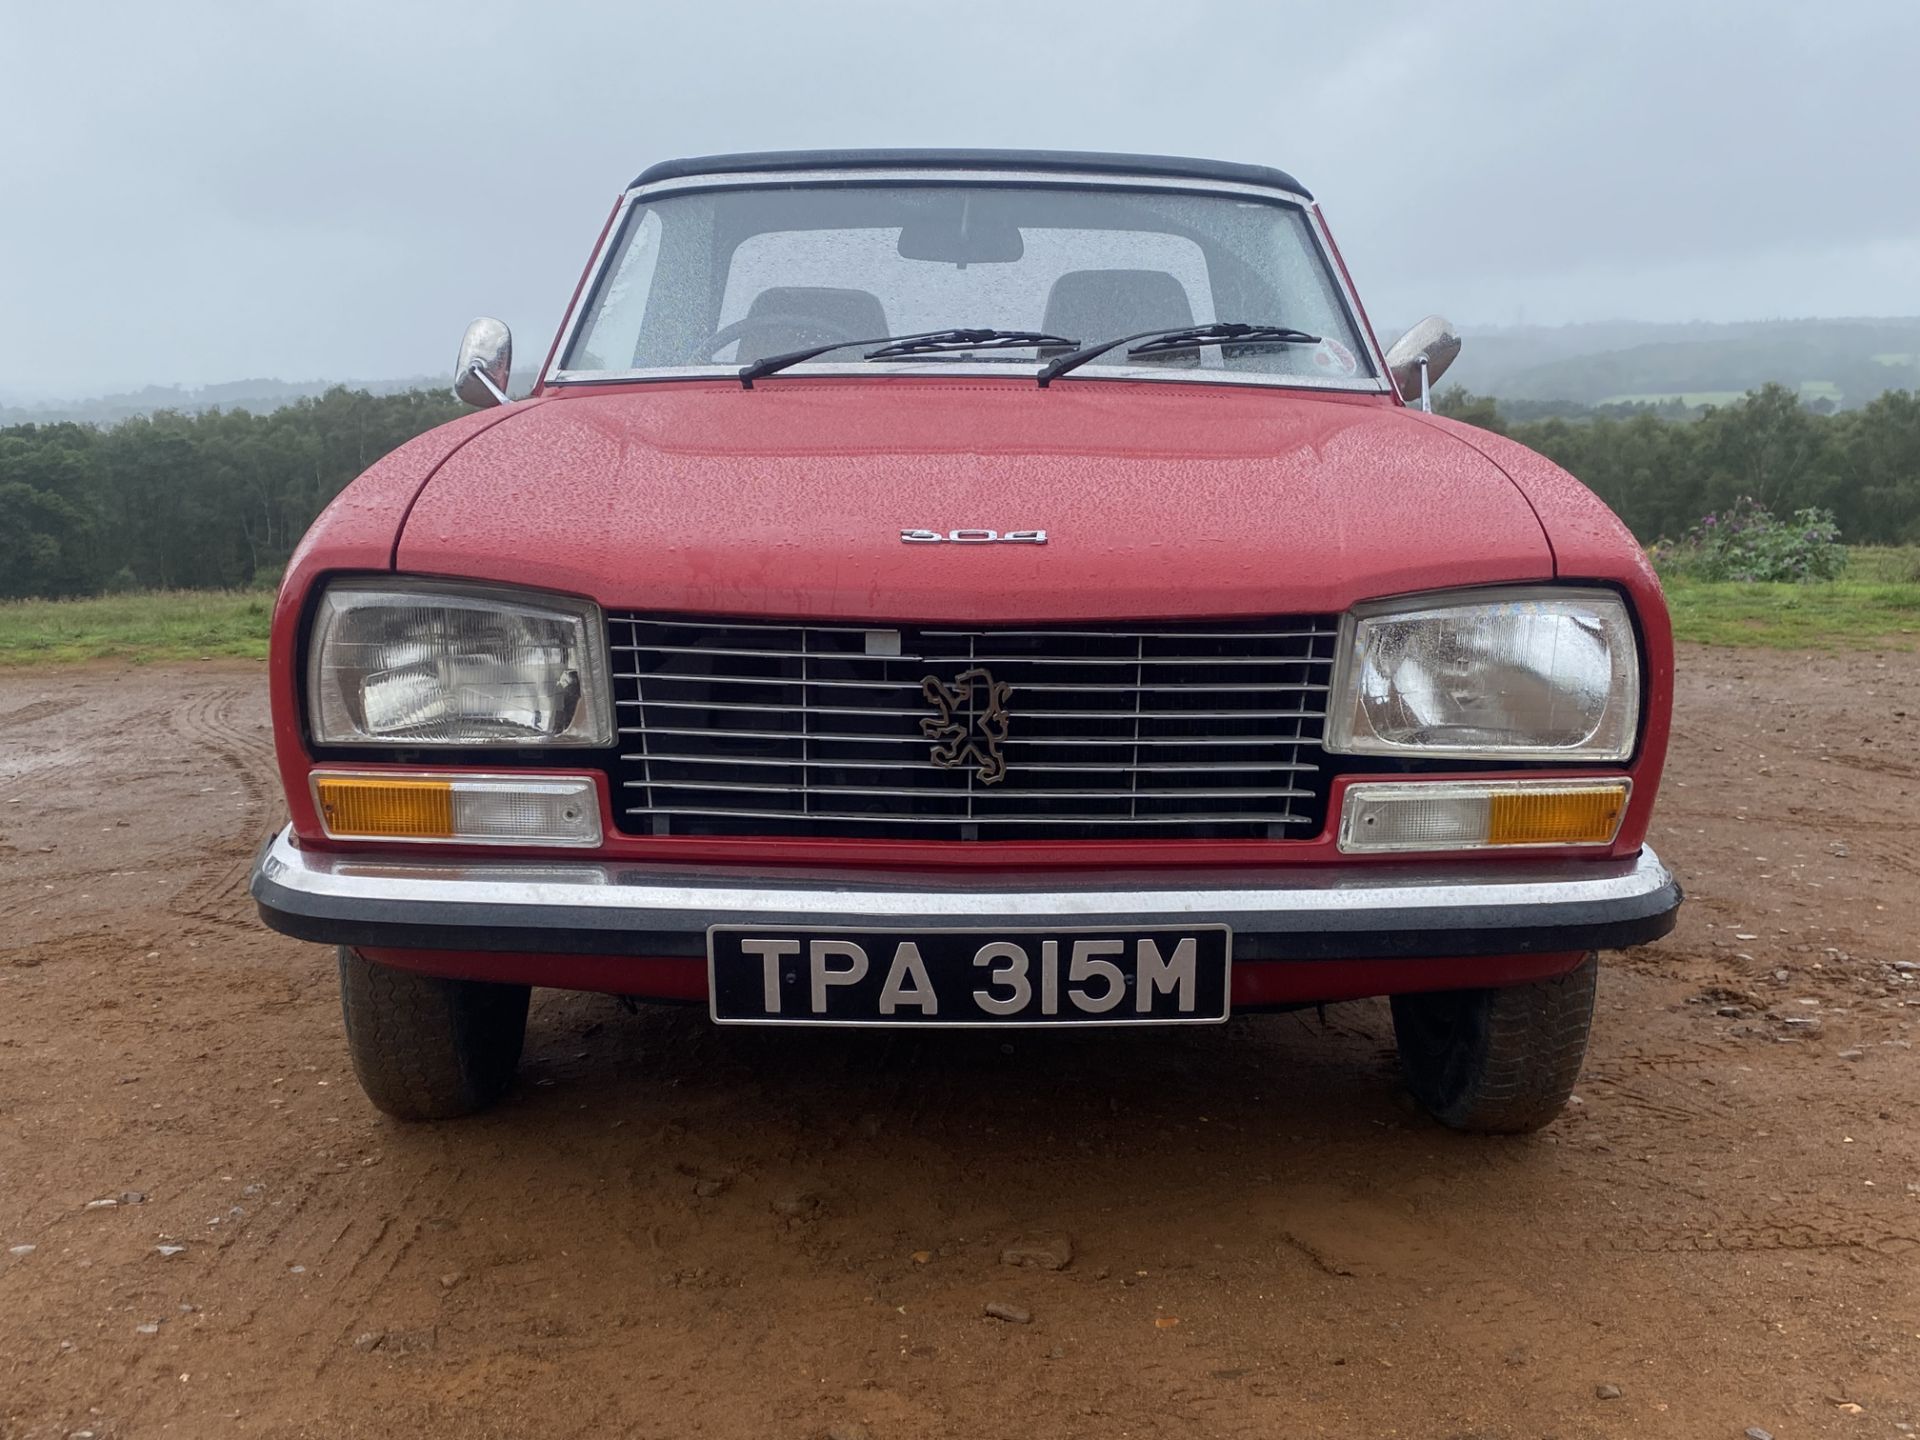 Peugeot 304 Convertible. Registration number: TPA 315M. Rare RHD drive model with 82,696 miles from - Image 12 of 14